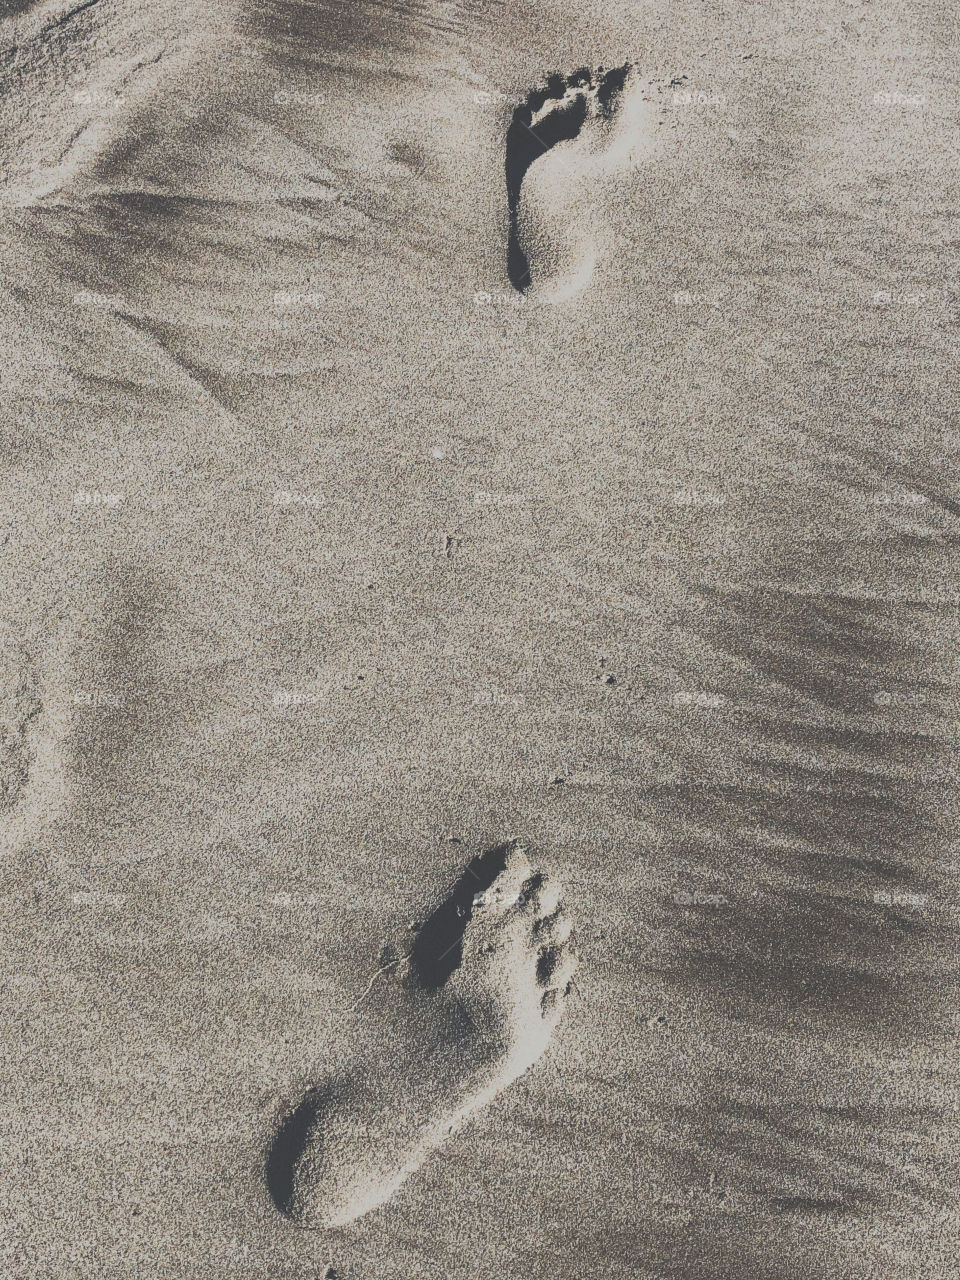 Magical footprints  in the Sand 